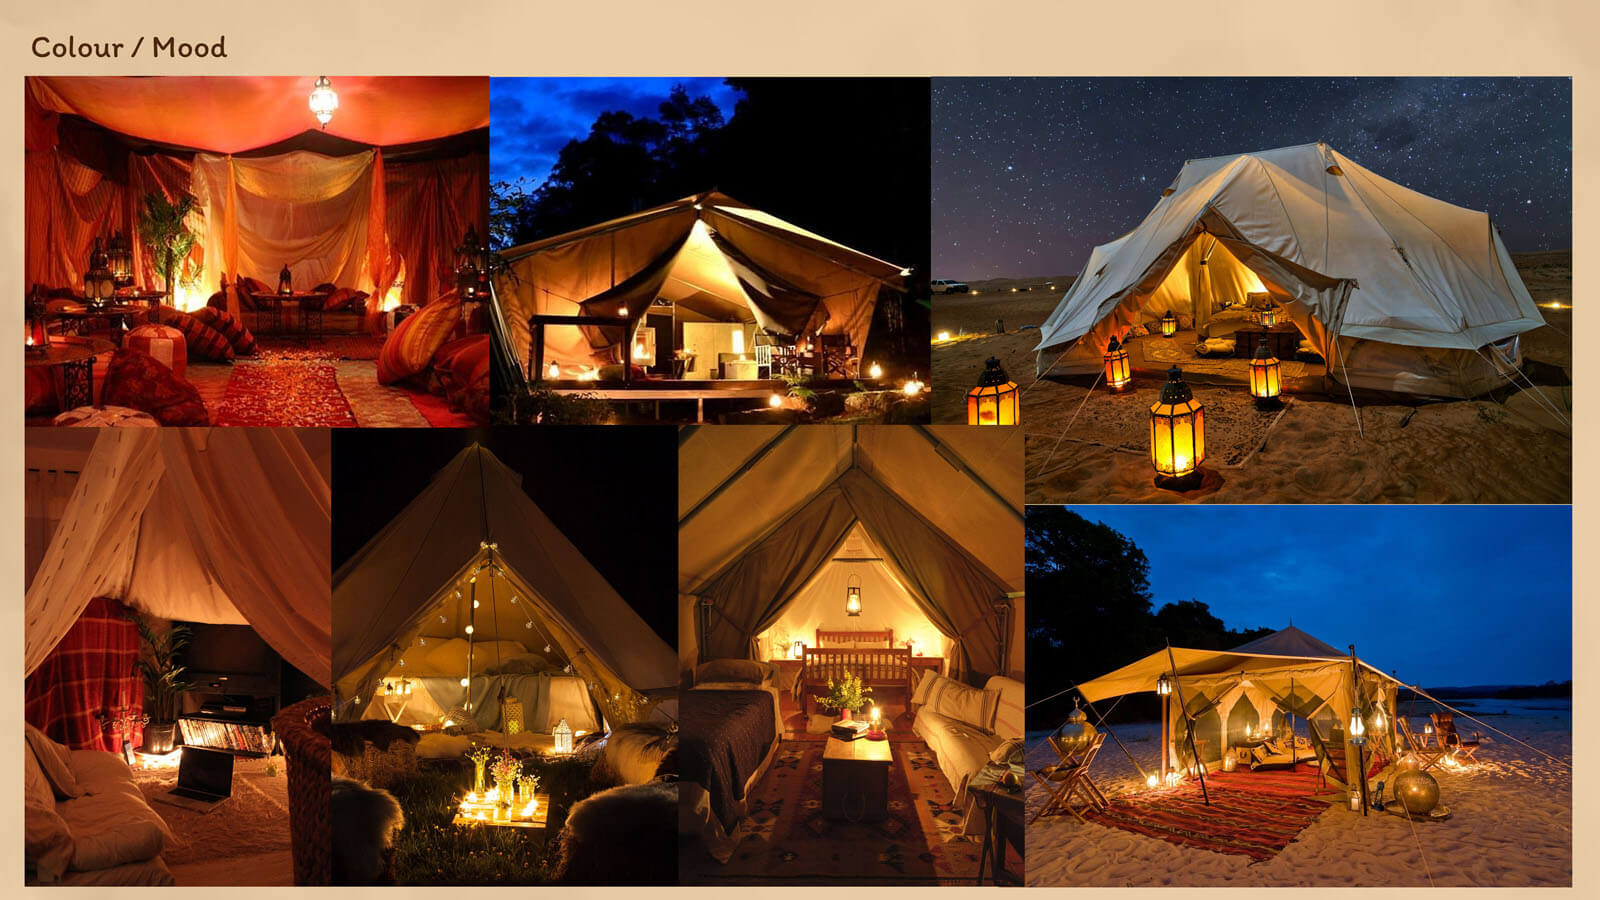 Collage of photographs of well-decorated tents and outdoor dwellings